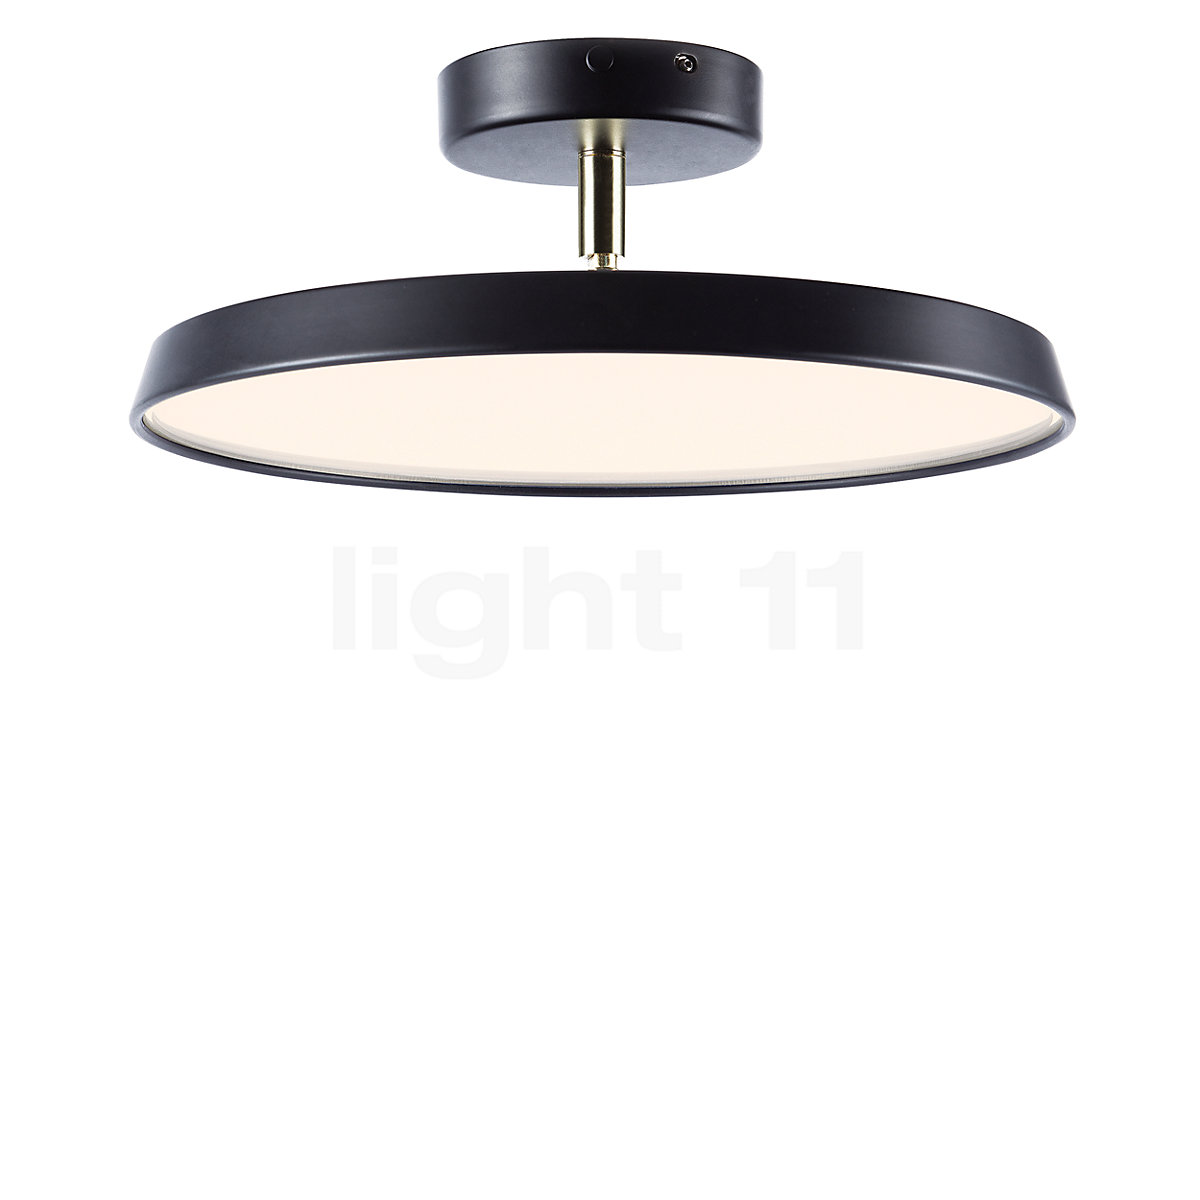 Buy Design for LED Pro People Kaito Ceiling the at Light